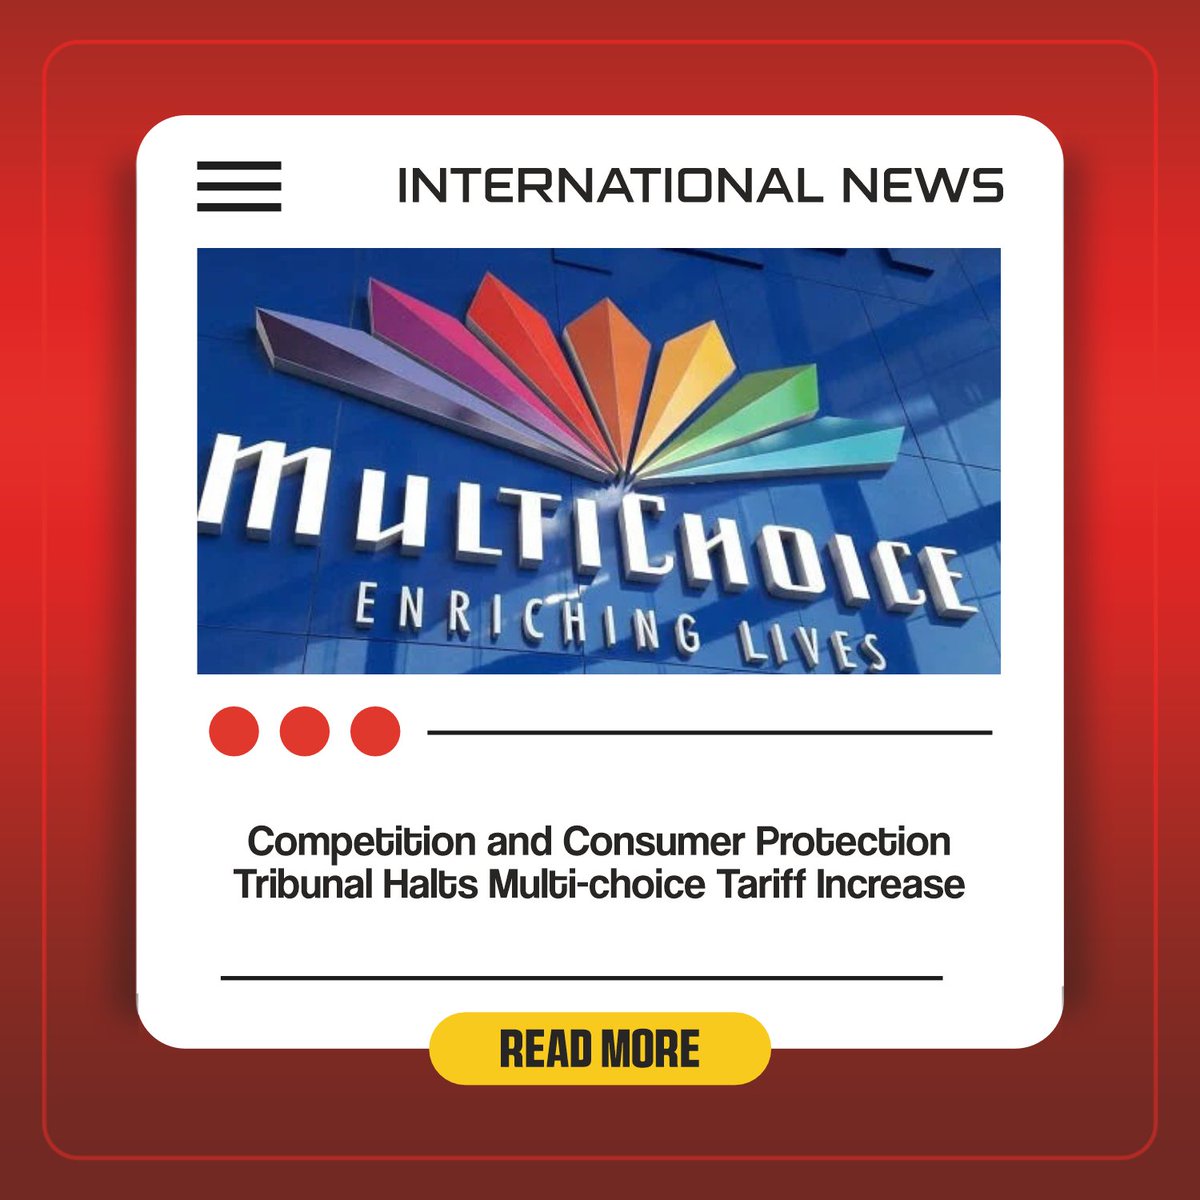 topknowledgemedia.com/competition-co… 

 #CompetitionTribunal #ConsumerProtection #MultiChoice #TariffIncrease #MediaNews #Broadcasting #RegulatoryCompliance #ConsumerRights #TelecomIndustry #LegalRuling